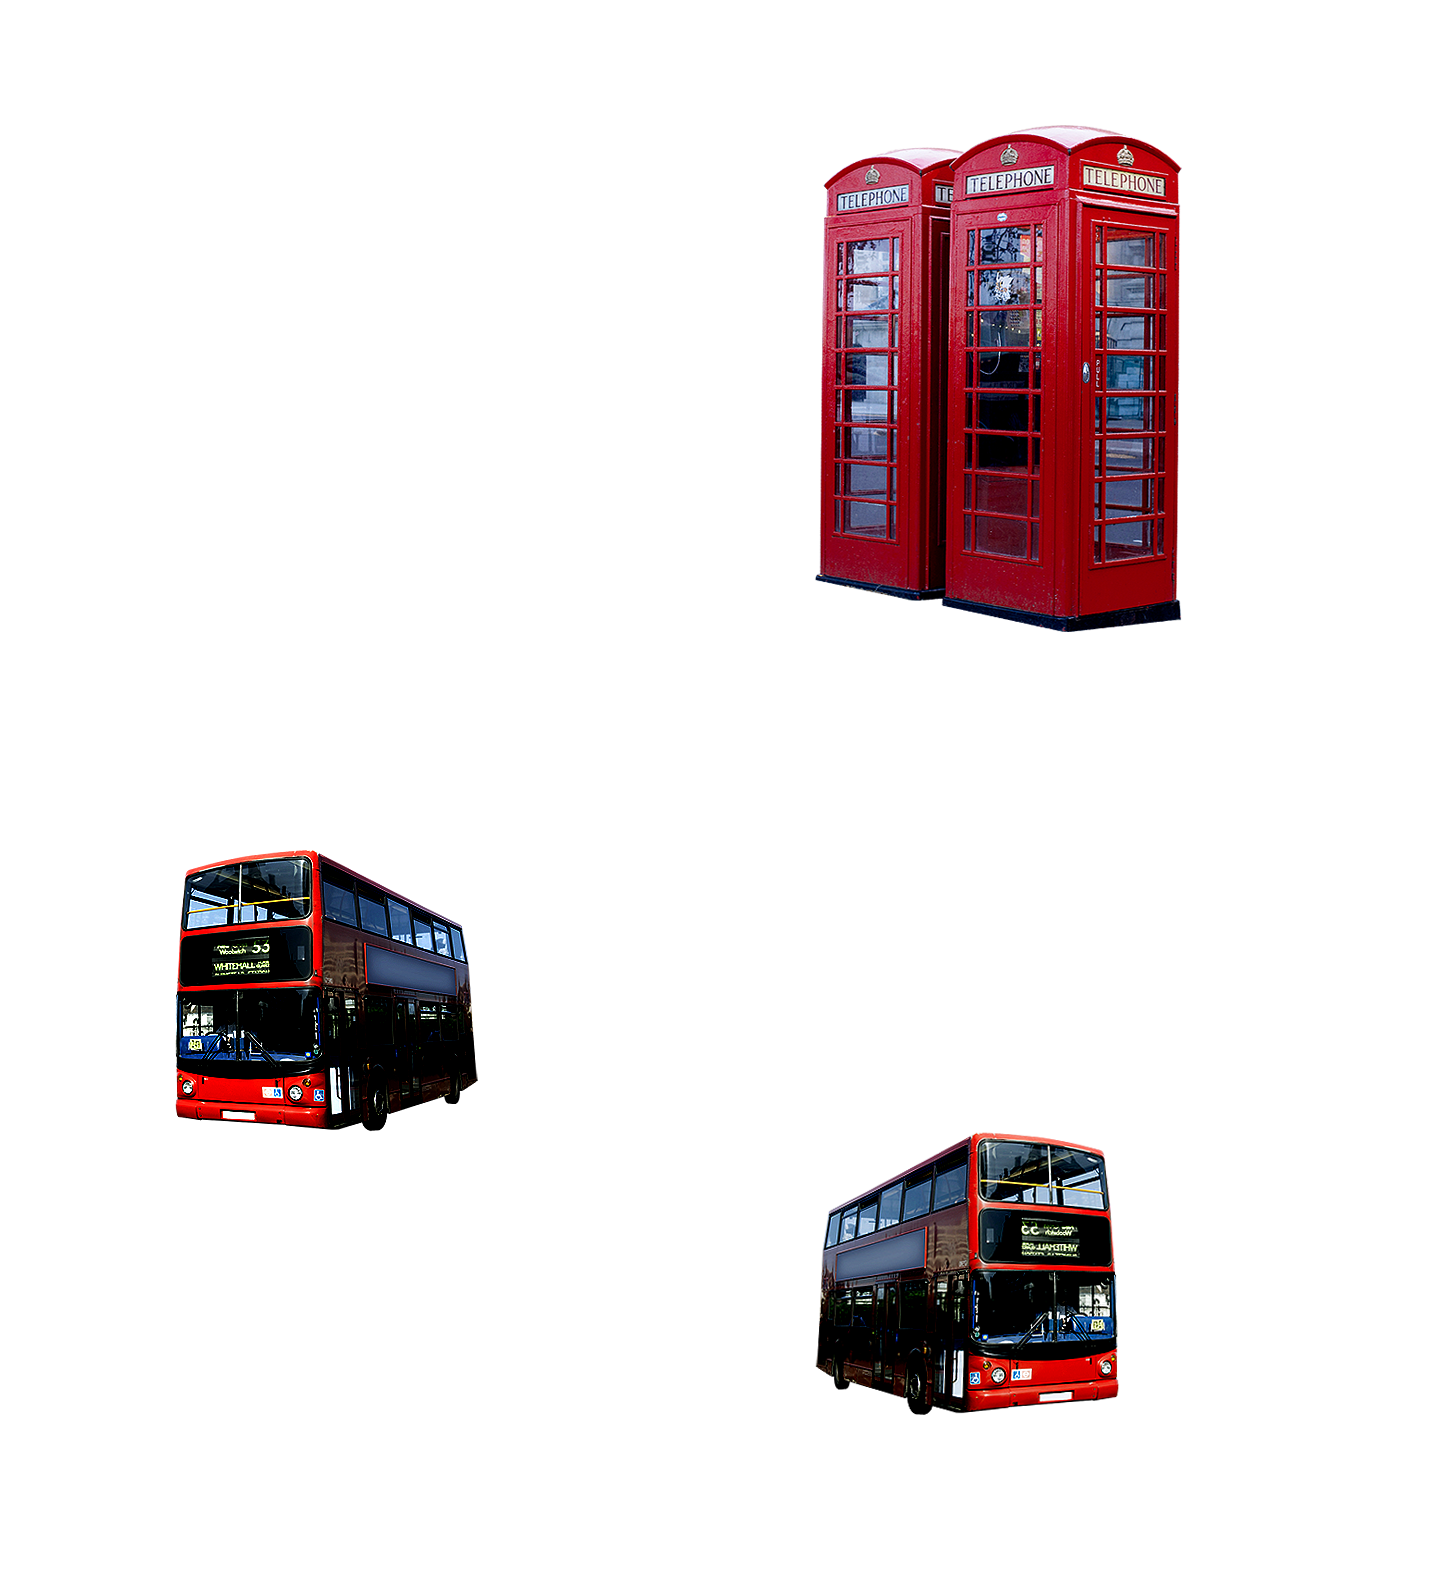 london telephone booths and  buses